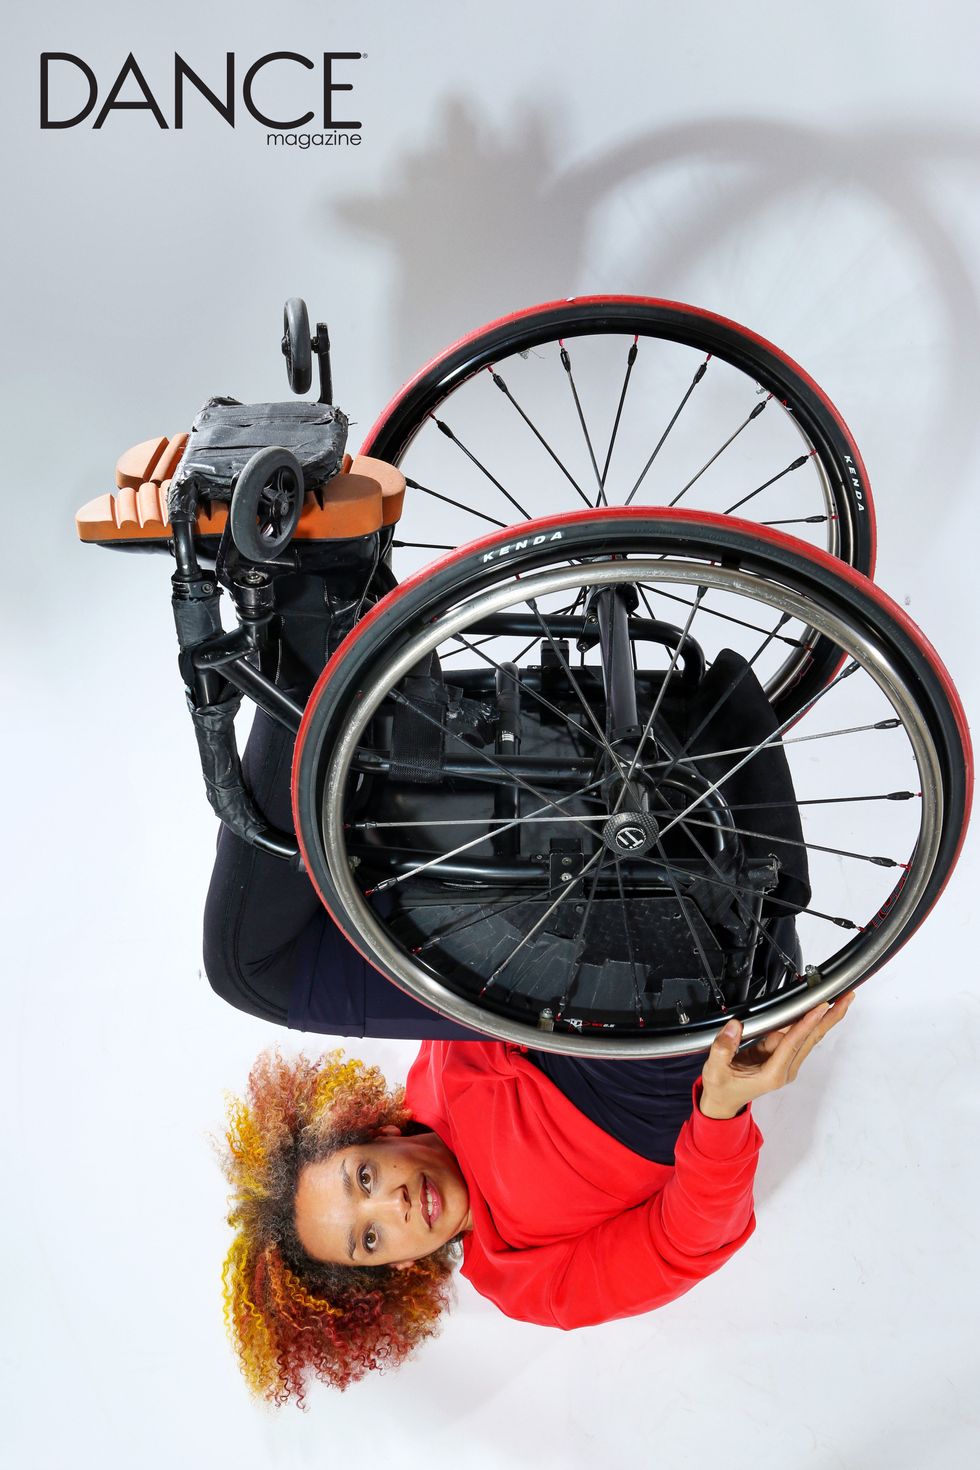 Alice Sheppard is upside down with wheels reaching to the sky. She looks directly at you. You can see the underside of her wheelchair, as though she is presenting it to you. Photo by Jayme Thornton.